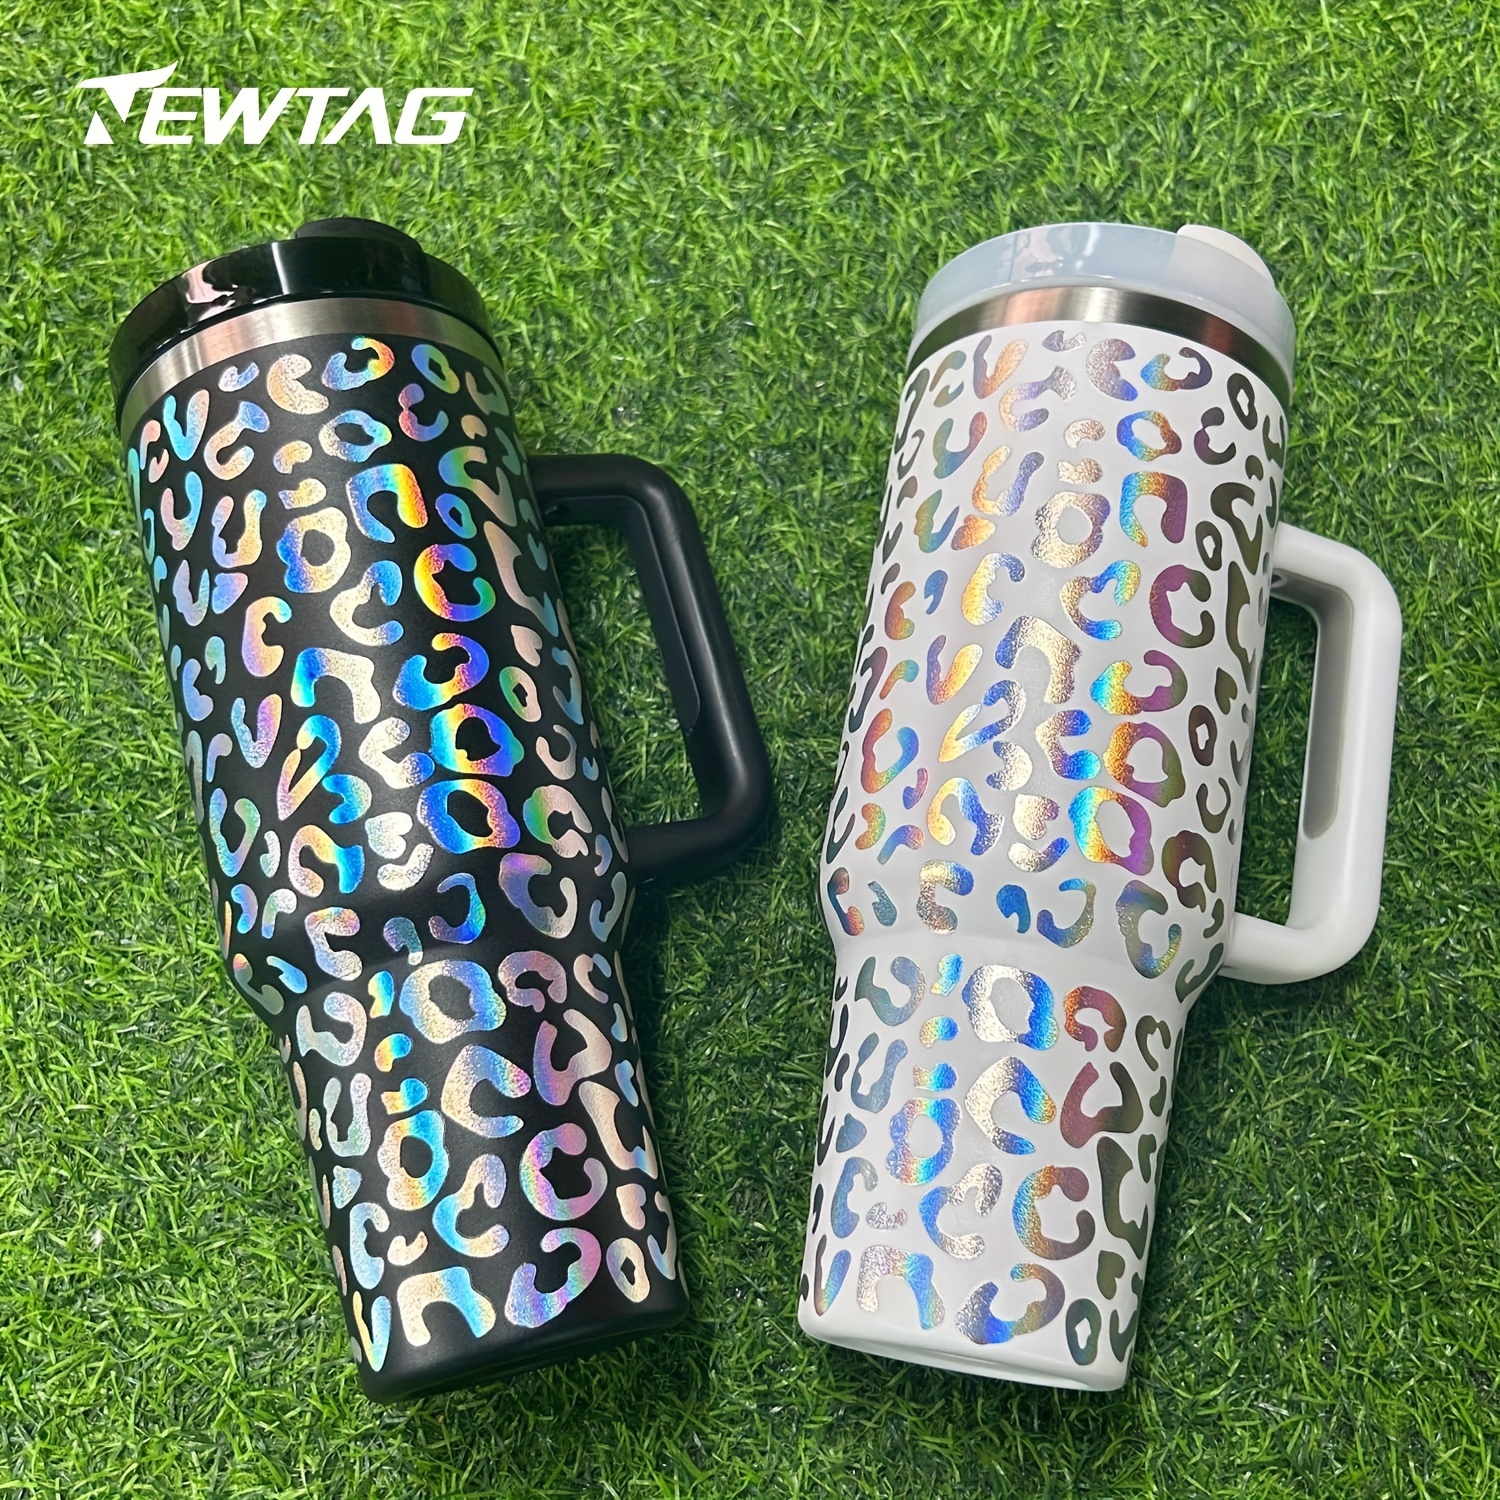 https://img.kwcdn.com/product/insulated-stainless-steel-straw-cup/d69d2f15w98k18-05529e79/Fancyalgo/VirtualModelMatting/6c4461802858686549a2188177887596.jpg?imageView2/2/w/500/q/60/format/webp